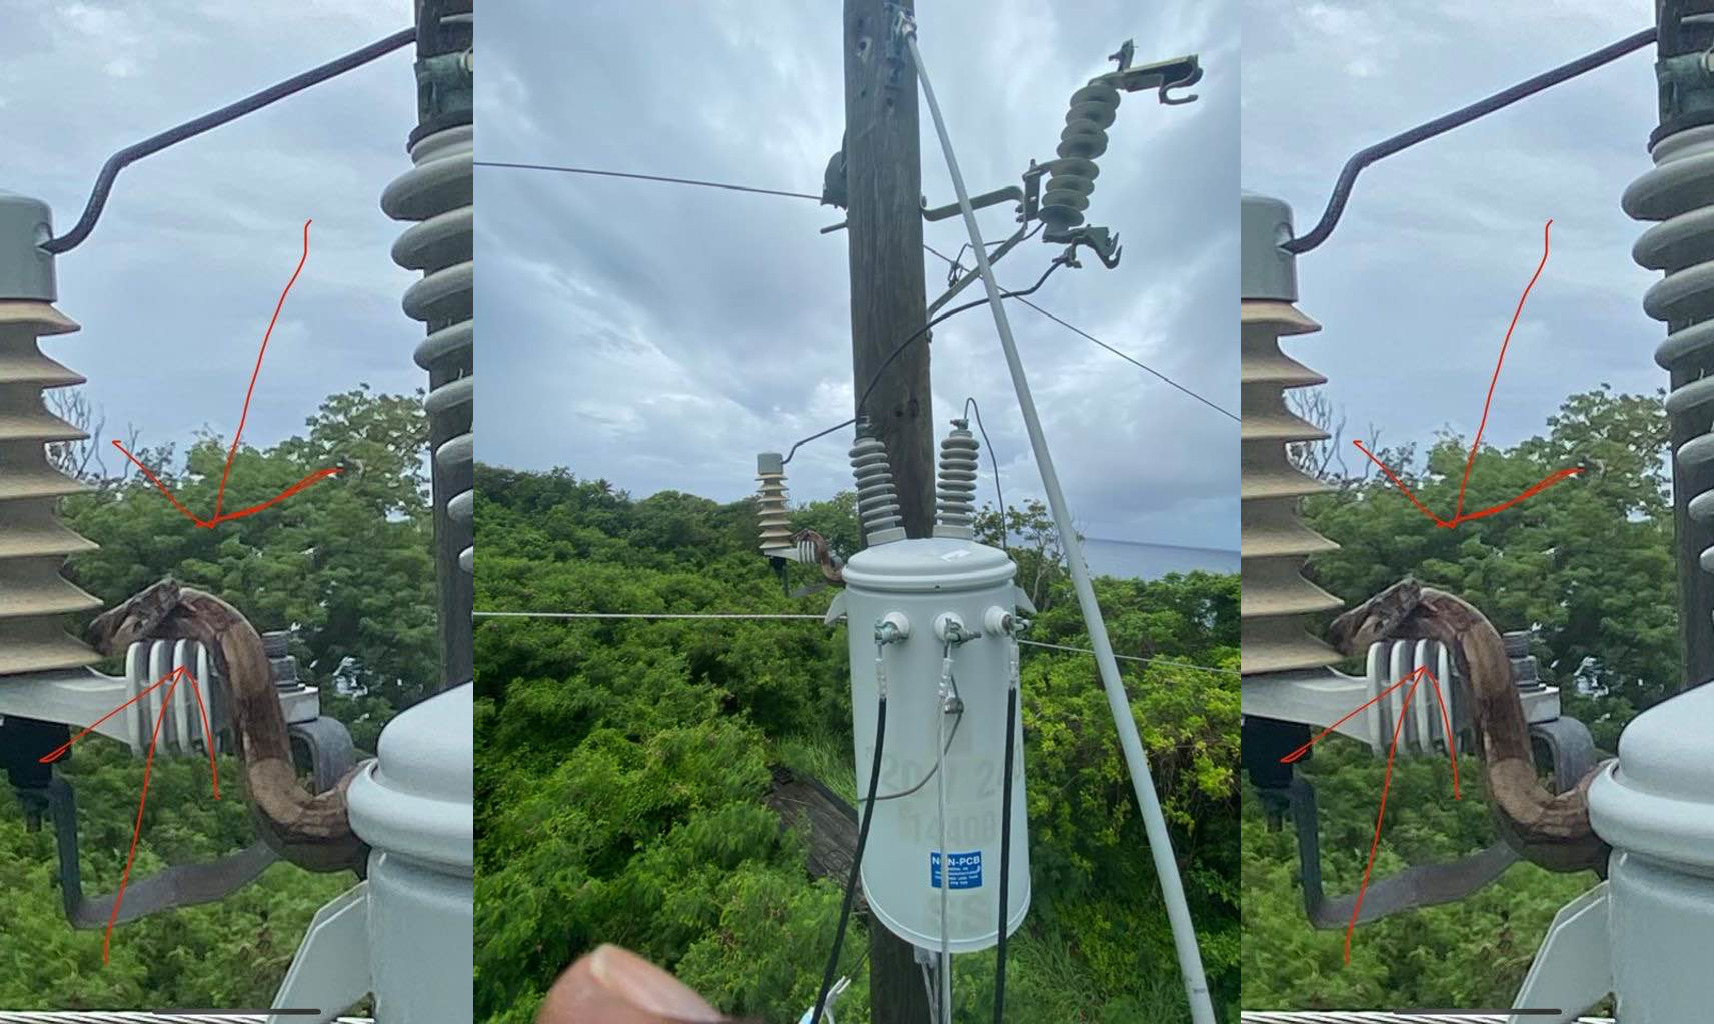 Slithering Snake On Power Line Leads To St. Croix Electrical Outage, Residents Say